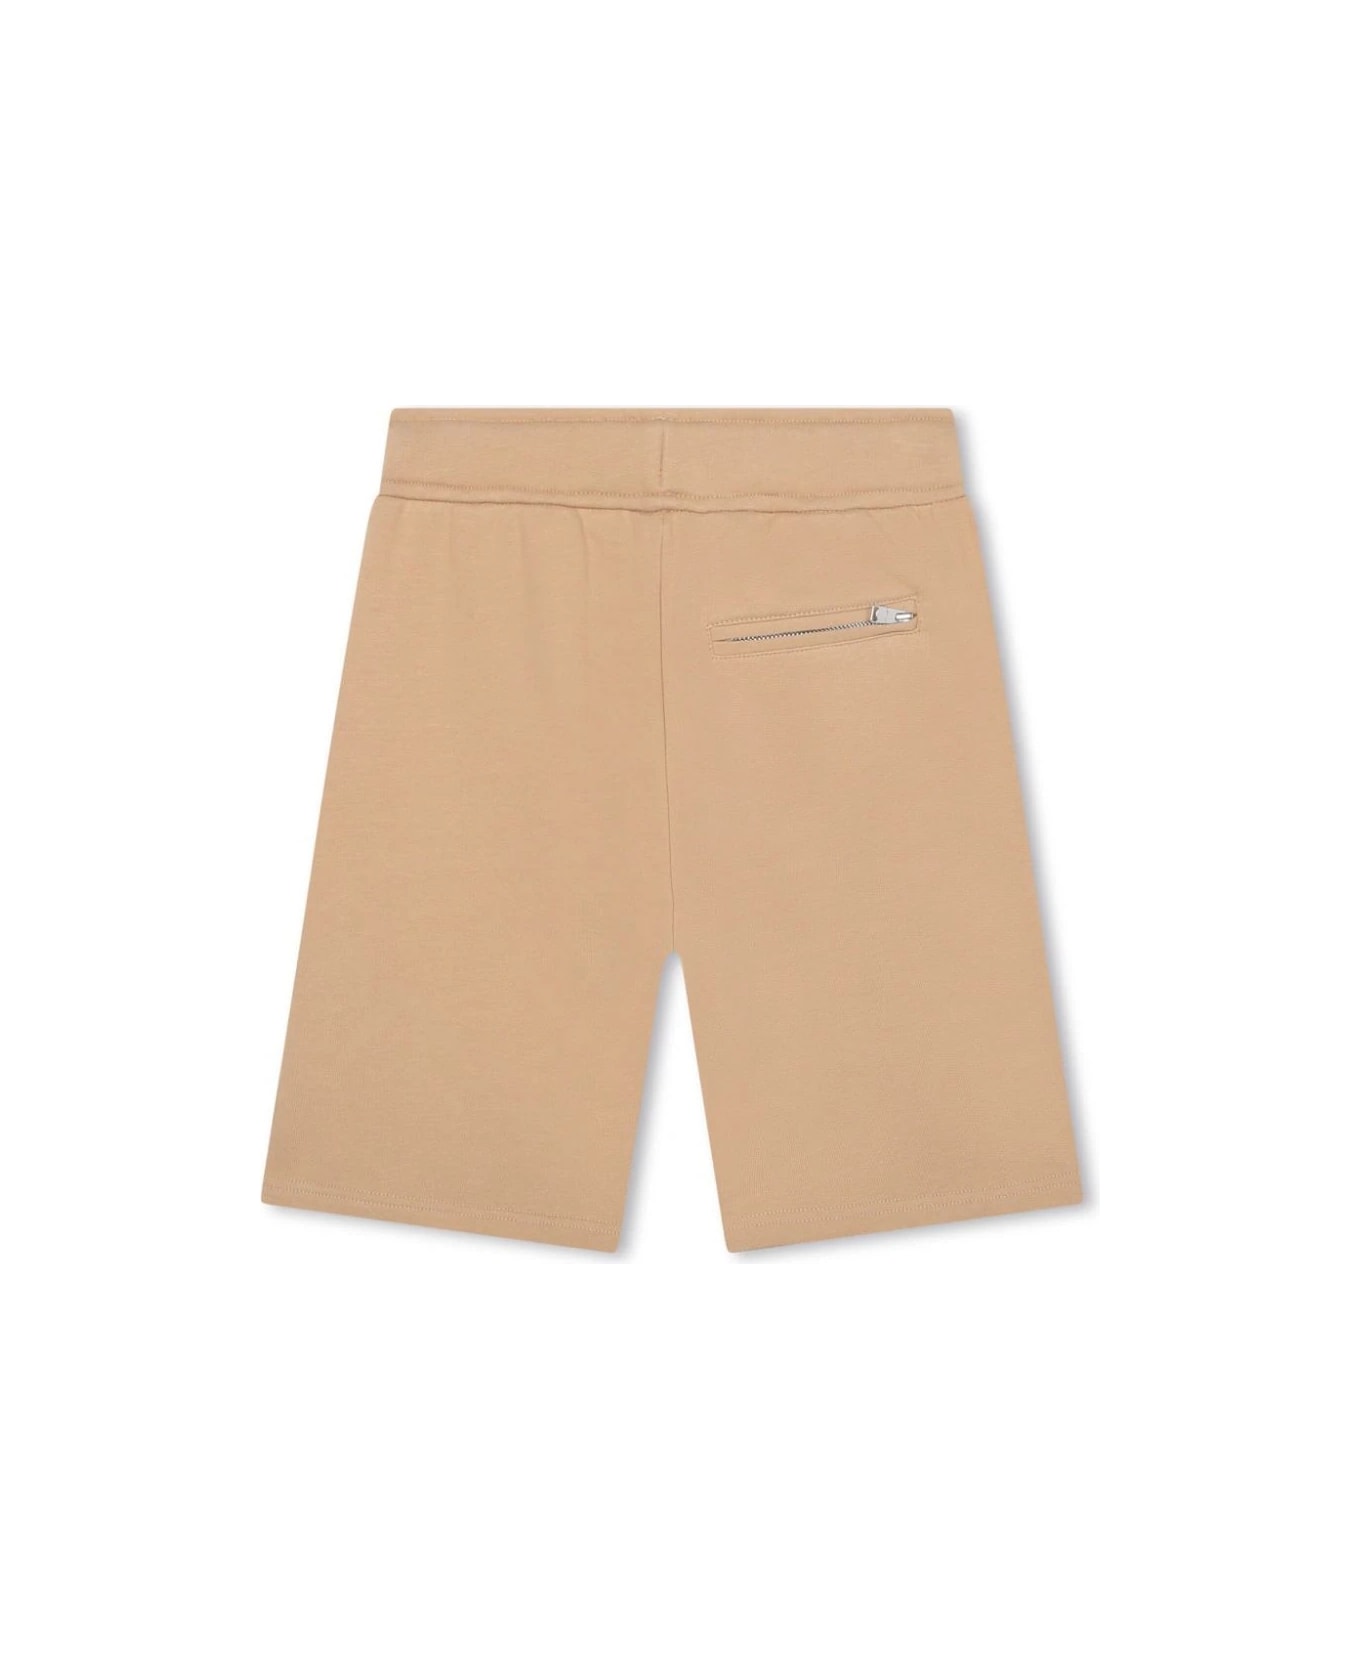 Lanvin Beige Shorts With Logo And "curb" Motif - Brown